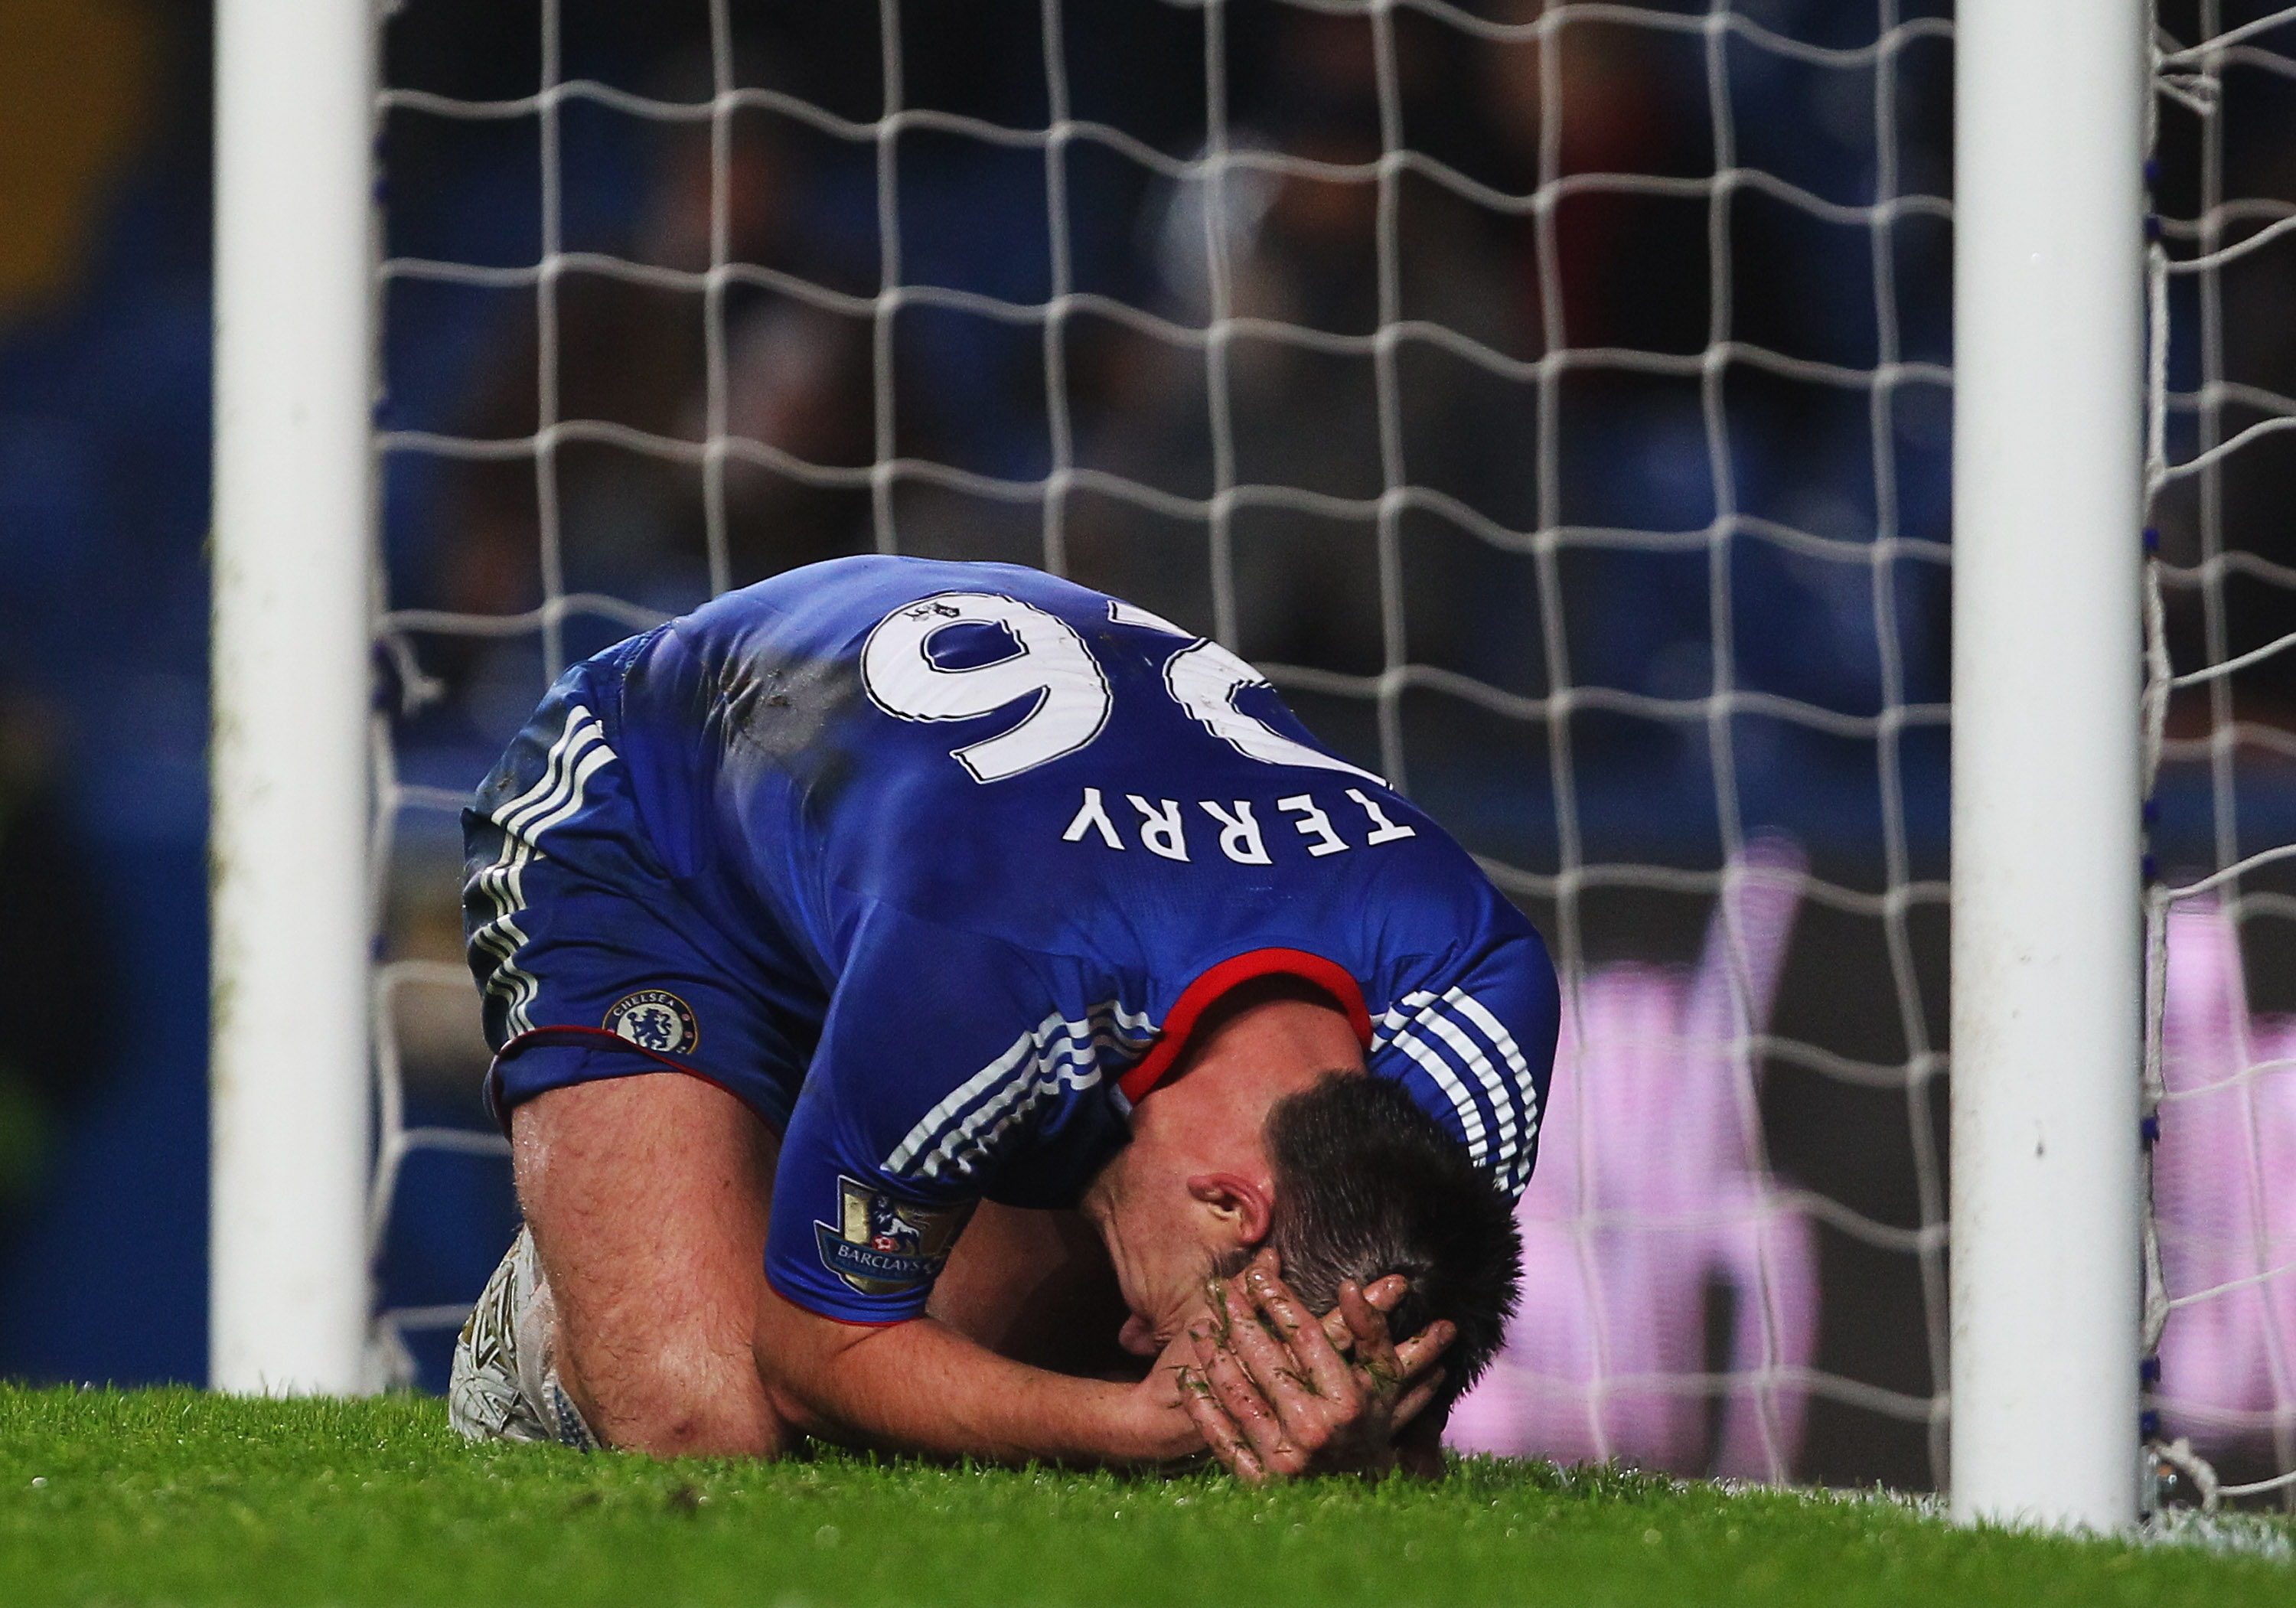 LONDON, UNITED KINGDOM - DECEMBER 29:  John Terry of Chelsea reacts during the Barclays Premier League match between Chelsea and Bolton Wanderers at Stamford Bridge on December 29, 2010 in London, England.  (Photo by Clive Rose/Getty Images)